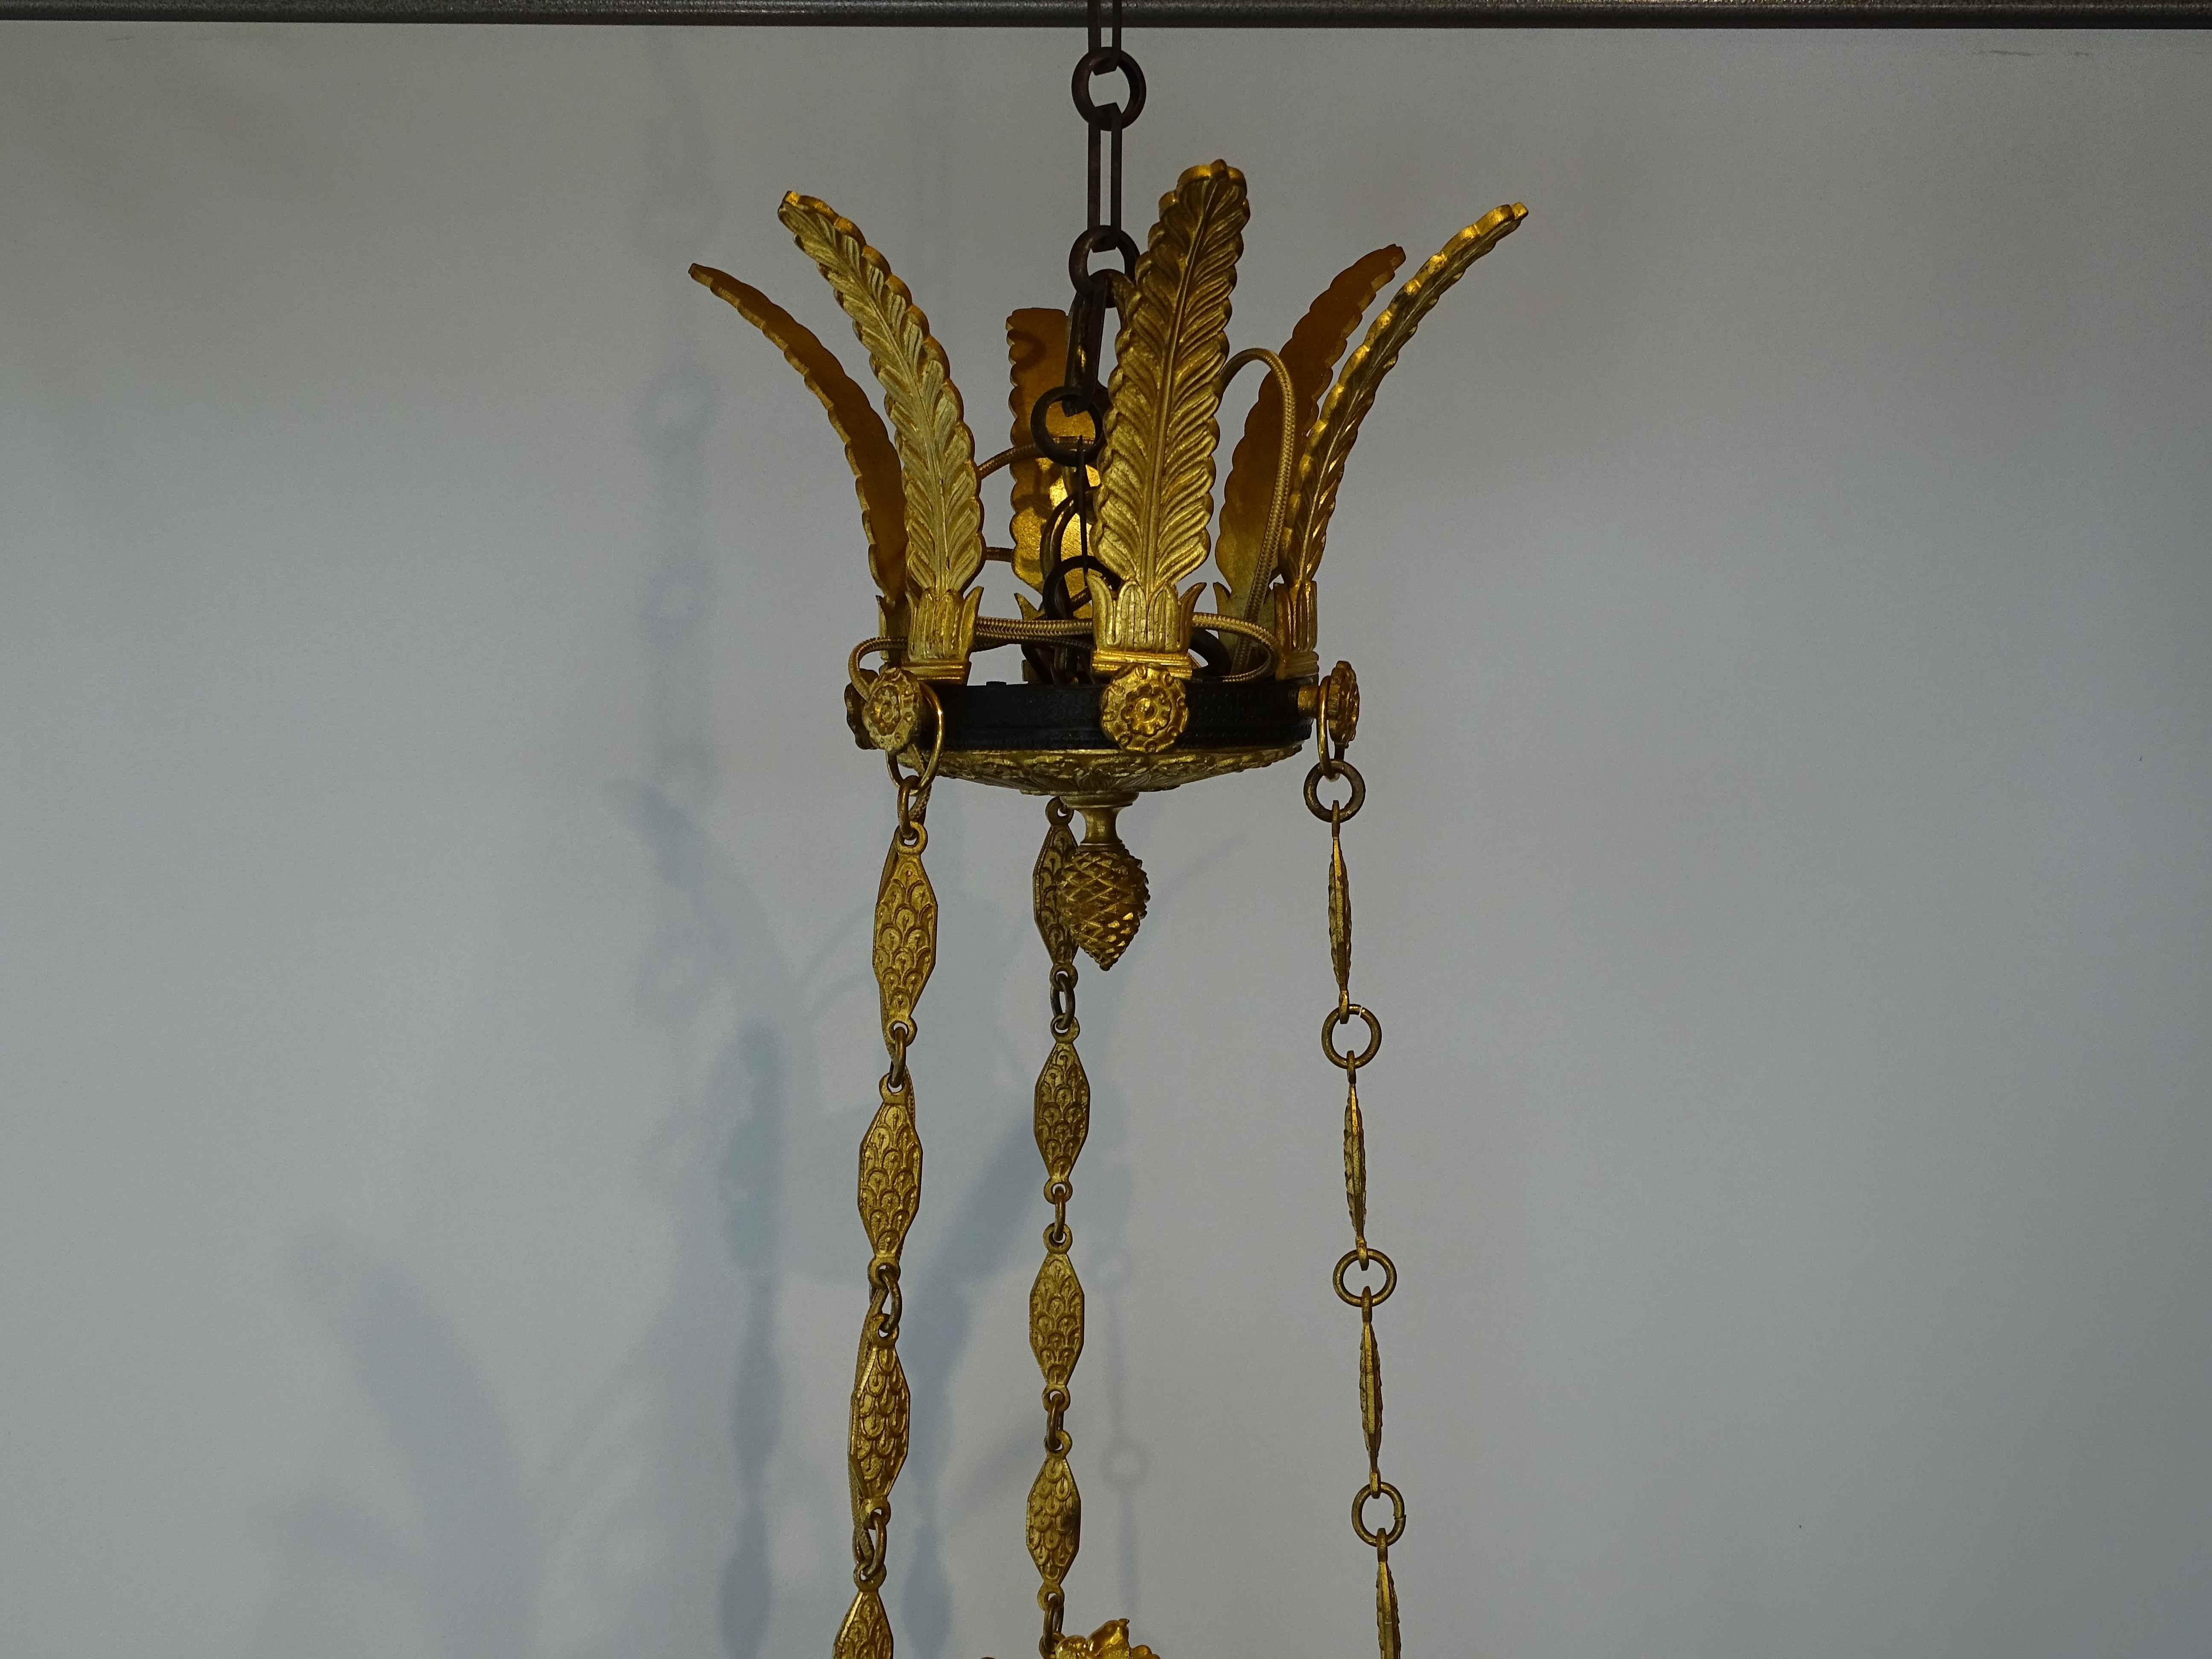 Extremly elegant French Empire 19th century gilt bronze and black patina six light chandelier signed by famous Millet Paris.

The chandelier has a beautiful decor composed of many finely chiselled details with a central winged angel.
It is